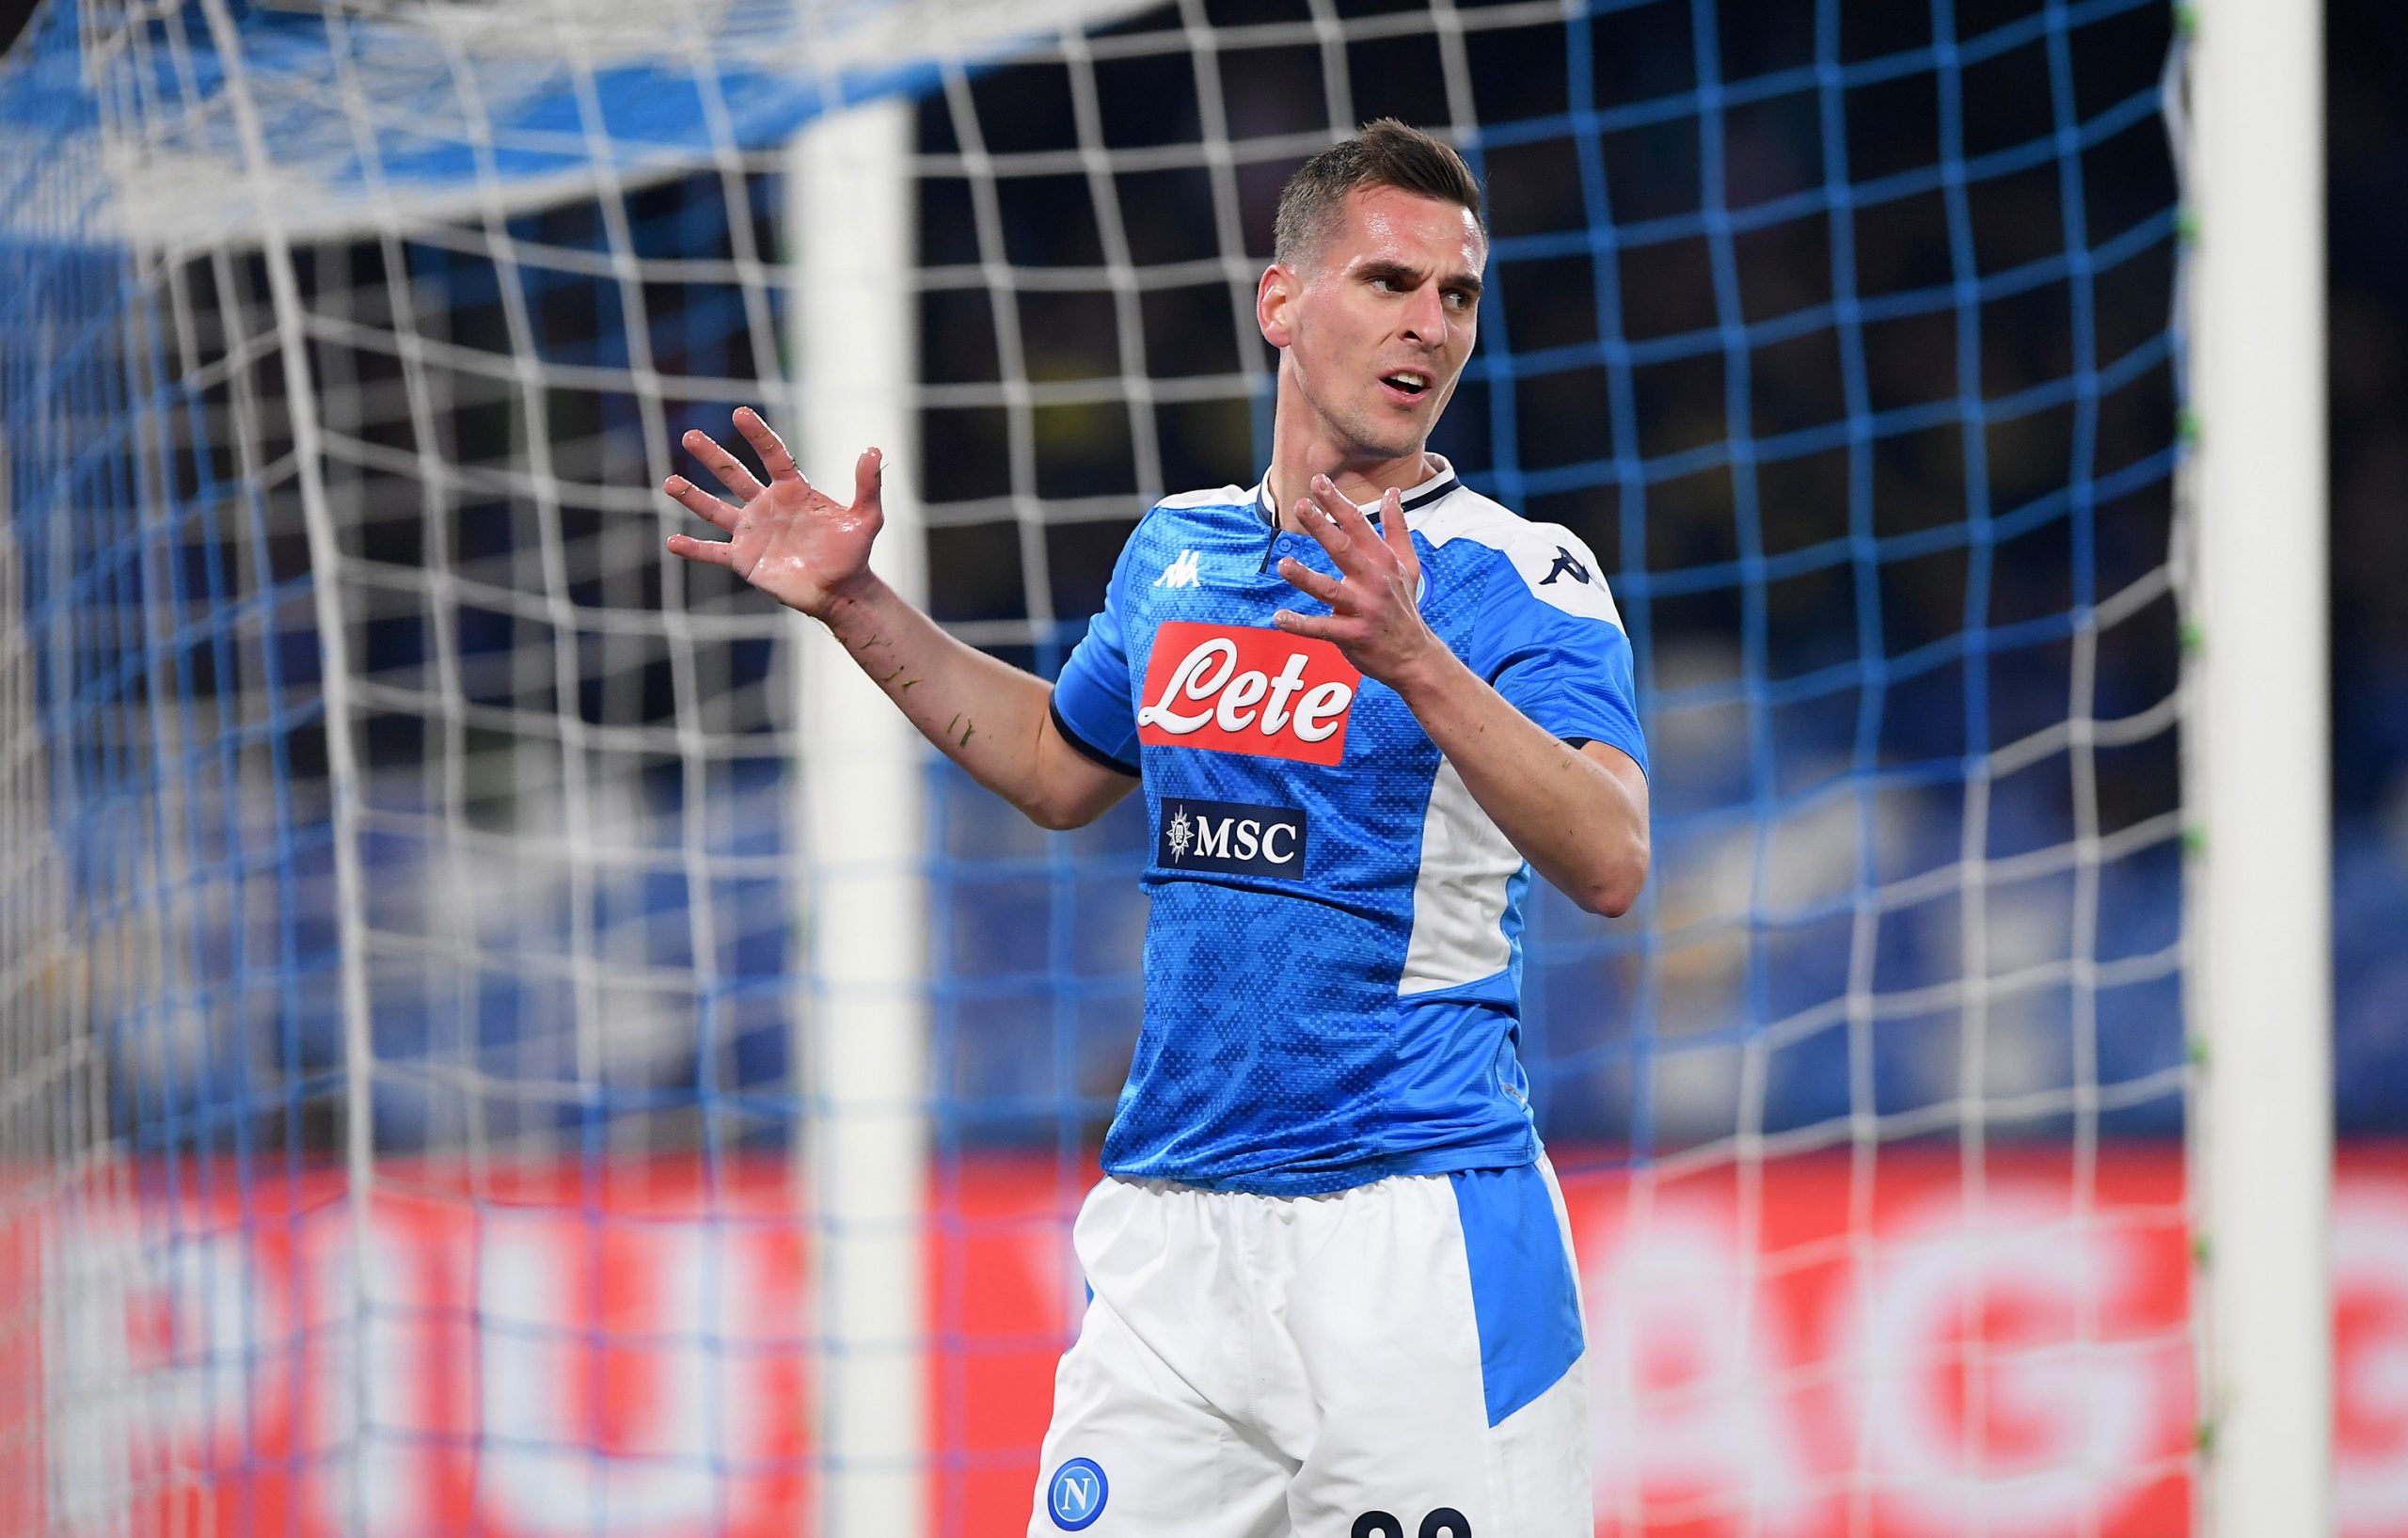 NAPLES, ITALY - JANUARY 18: Arkadiusz Milik of SSC Napoli reacts during the Serie A match between SSC Napoli and  ACF Fiorentina at Stadio San Paolo on January 18, 2020 in Naples, Italy. (Photo by Francesco Pecoraro/Getty Images)